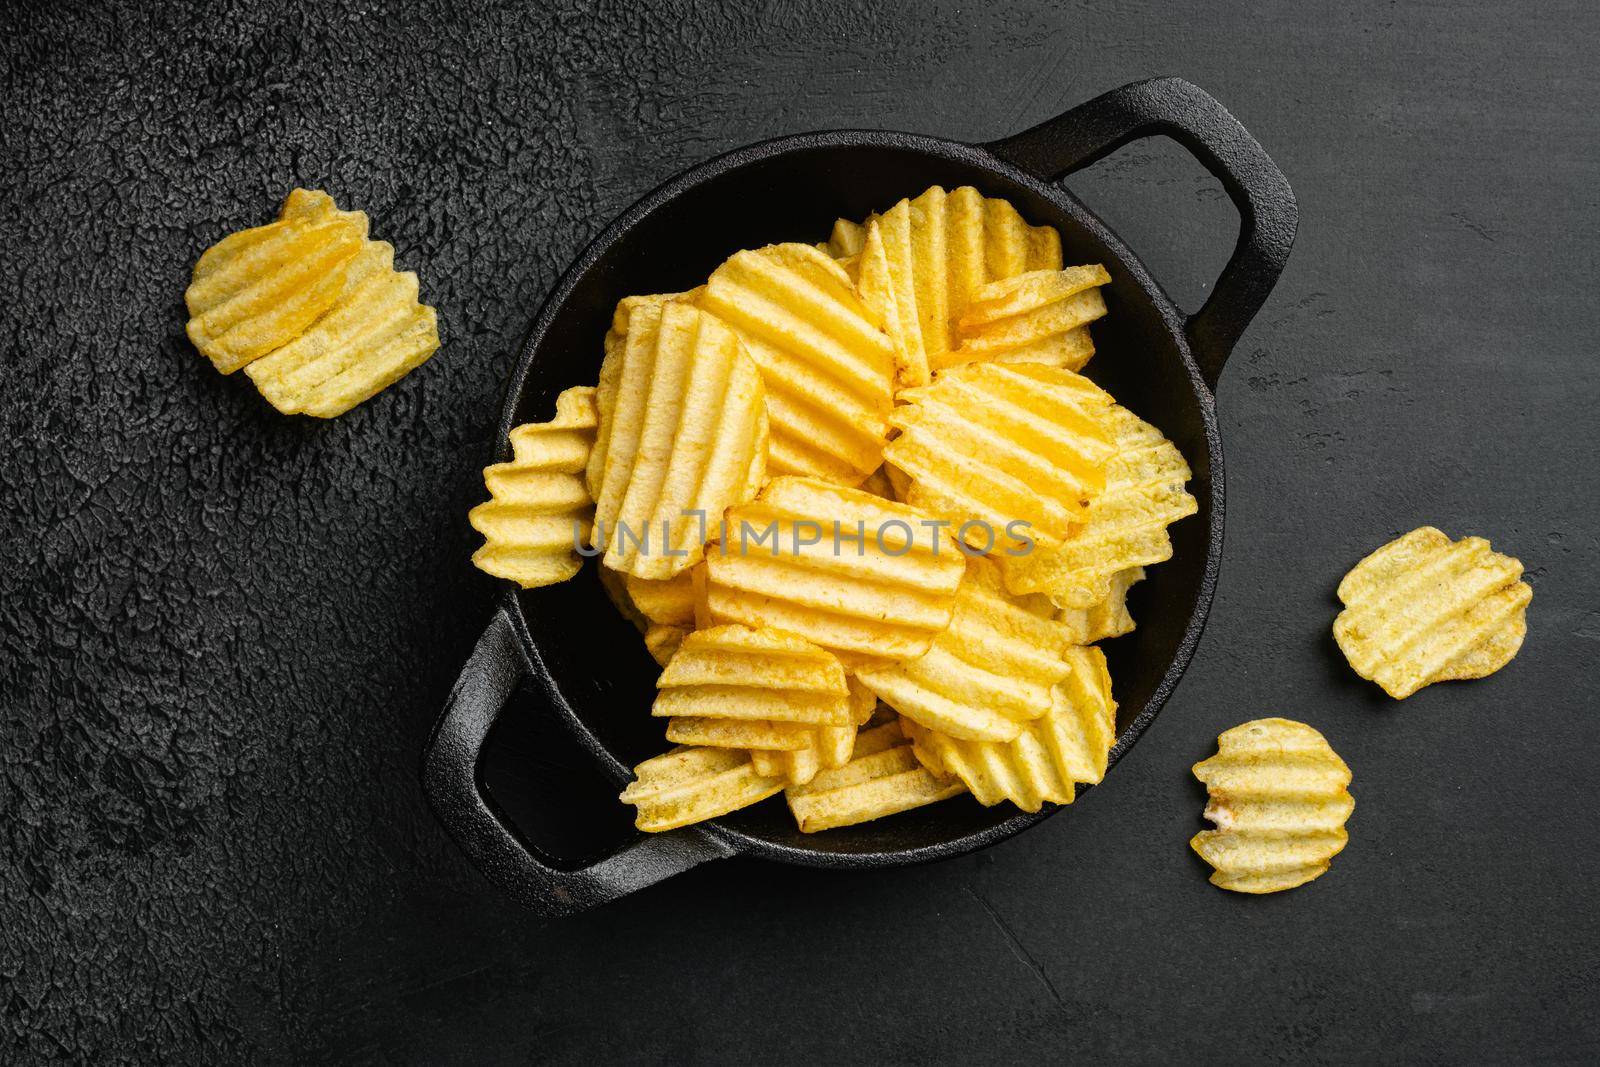 Wavy Ranch Flavored Potato Chips on black dark stone table background, top view flat lay by Ilianesolenyi